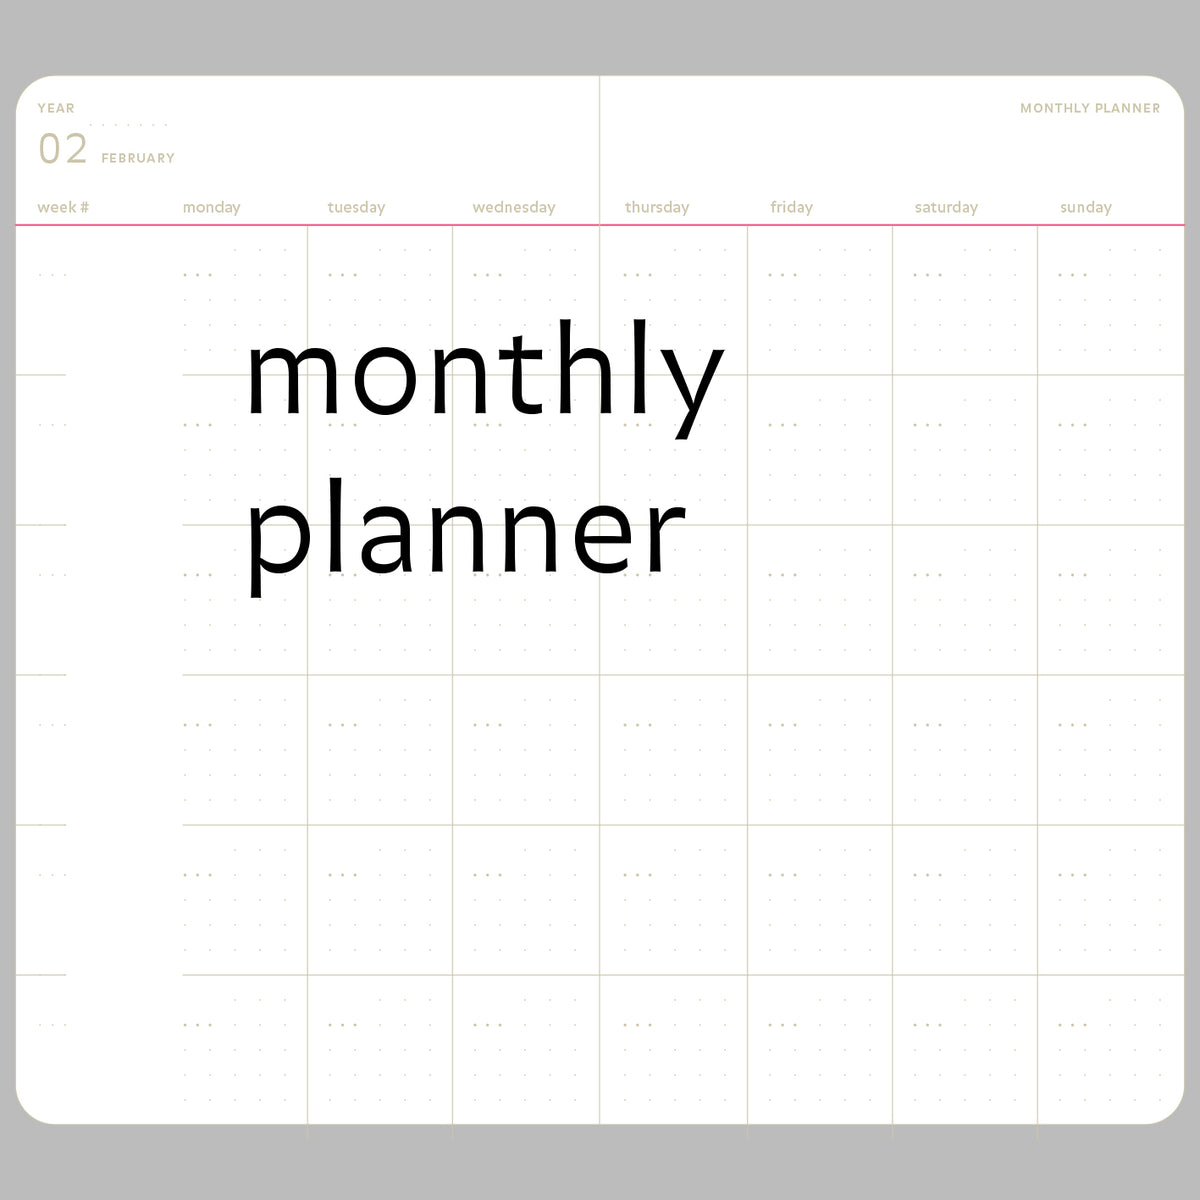 open-dated planner